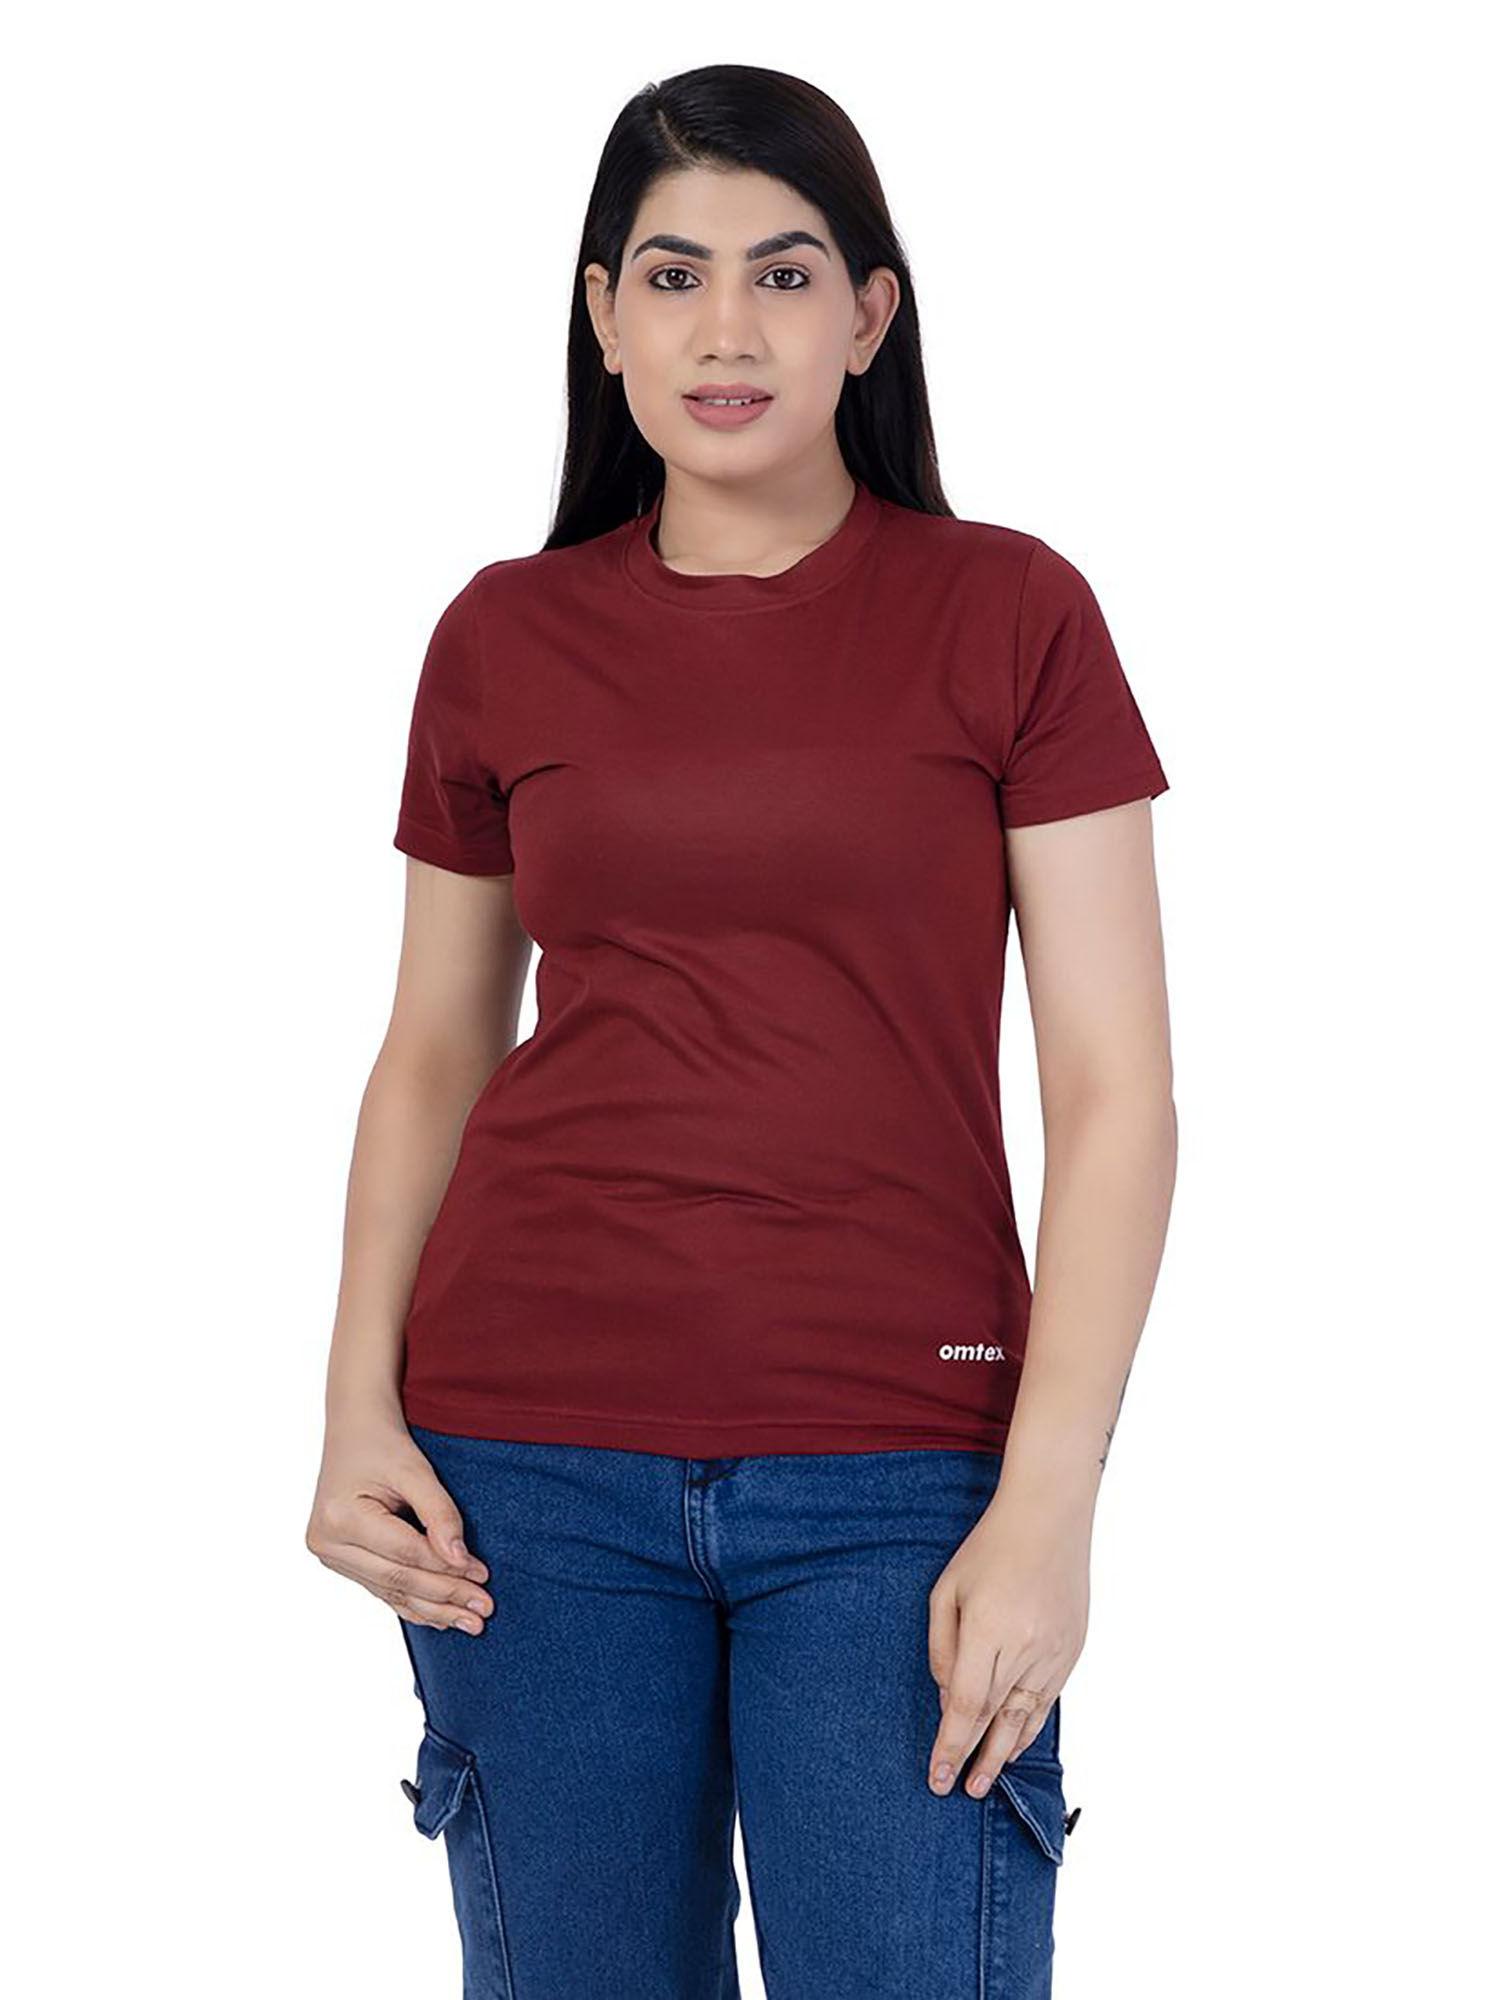 fitness sports round neck activewear t shirt for women maroon